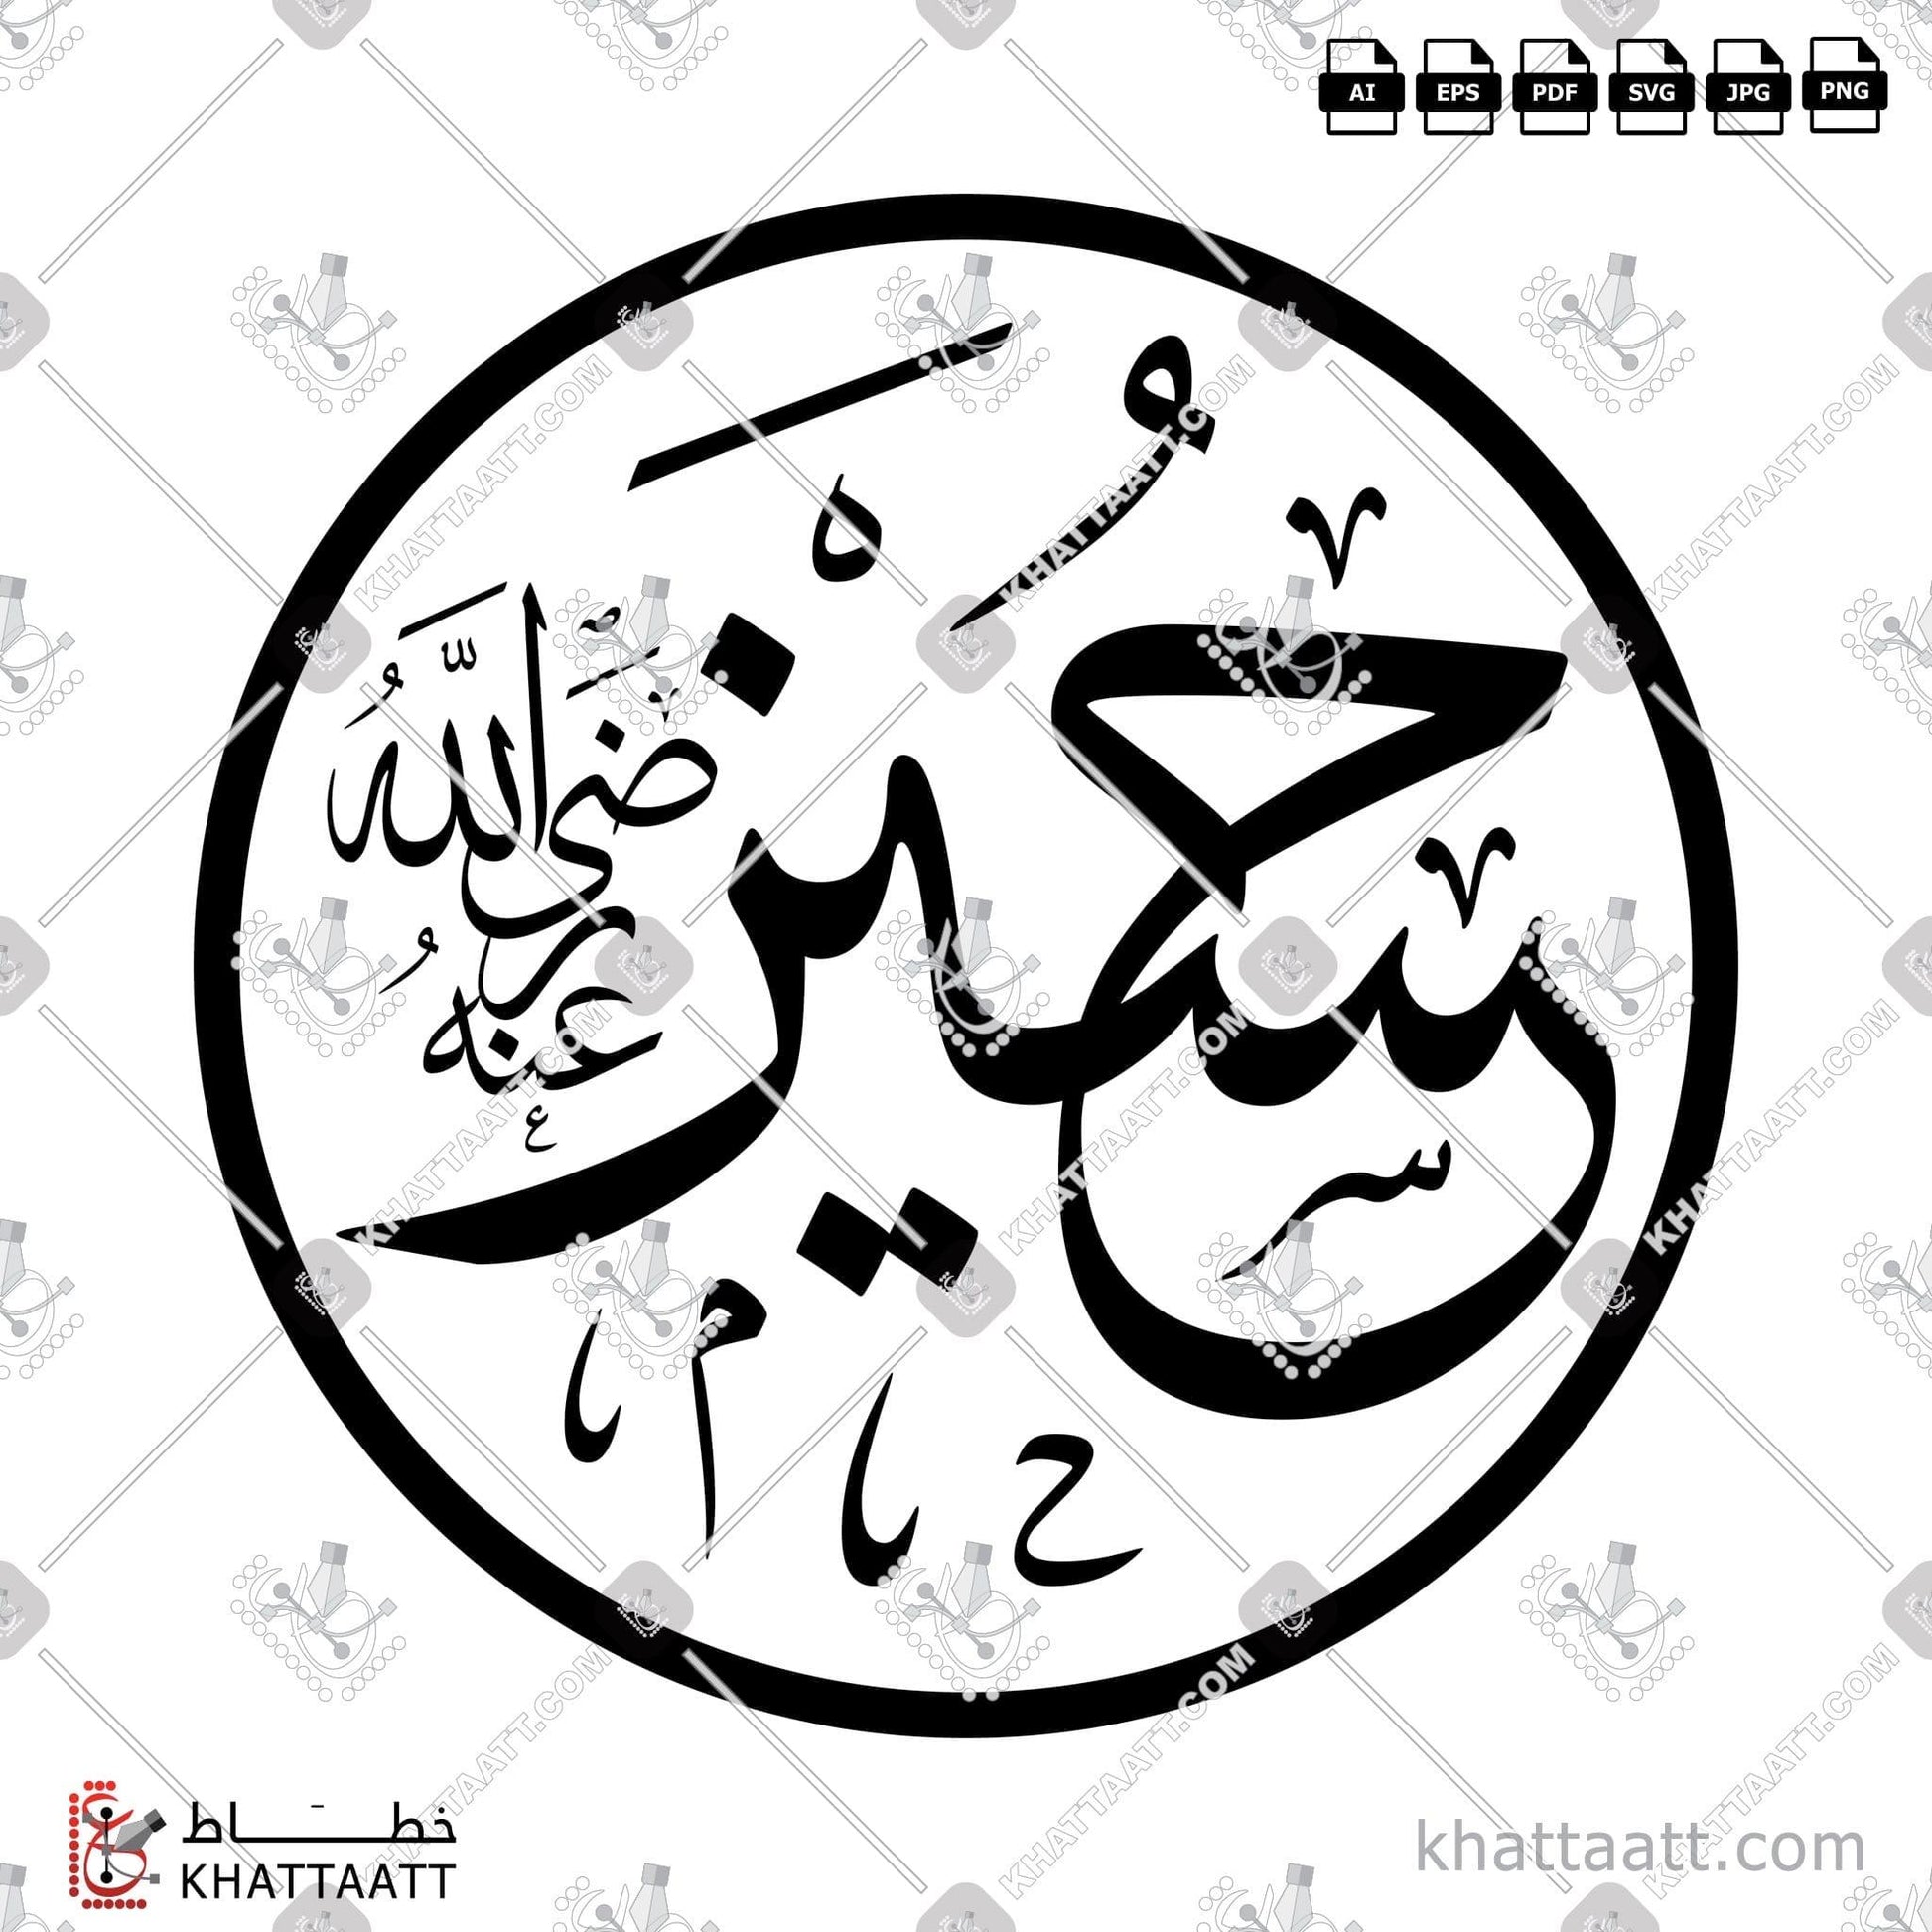 Download Arabic Calligraphy of Hagia Sophia Mosque Calligraphy Set in Thuluth - خط الثلث in vector and .png